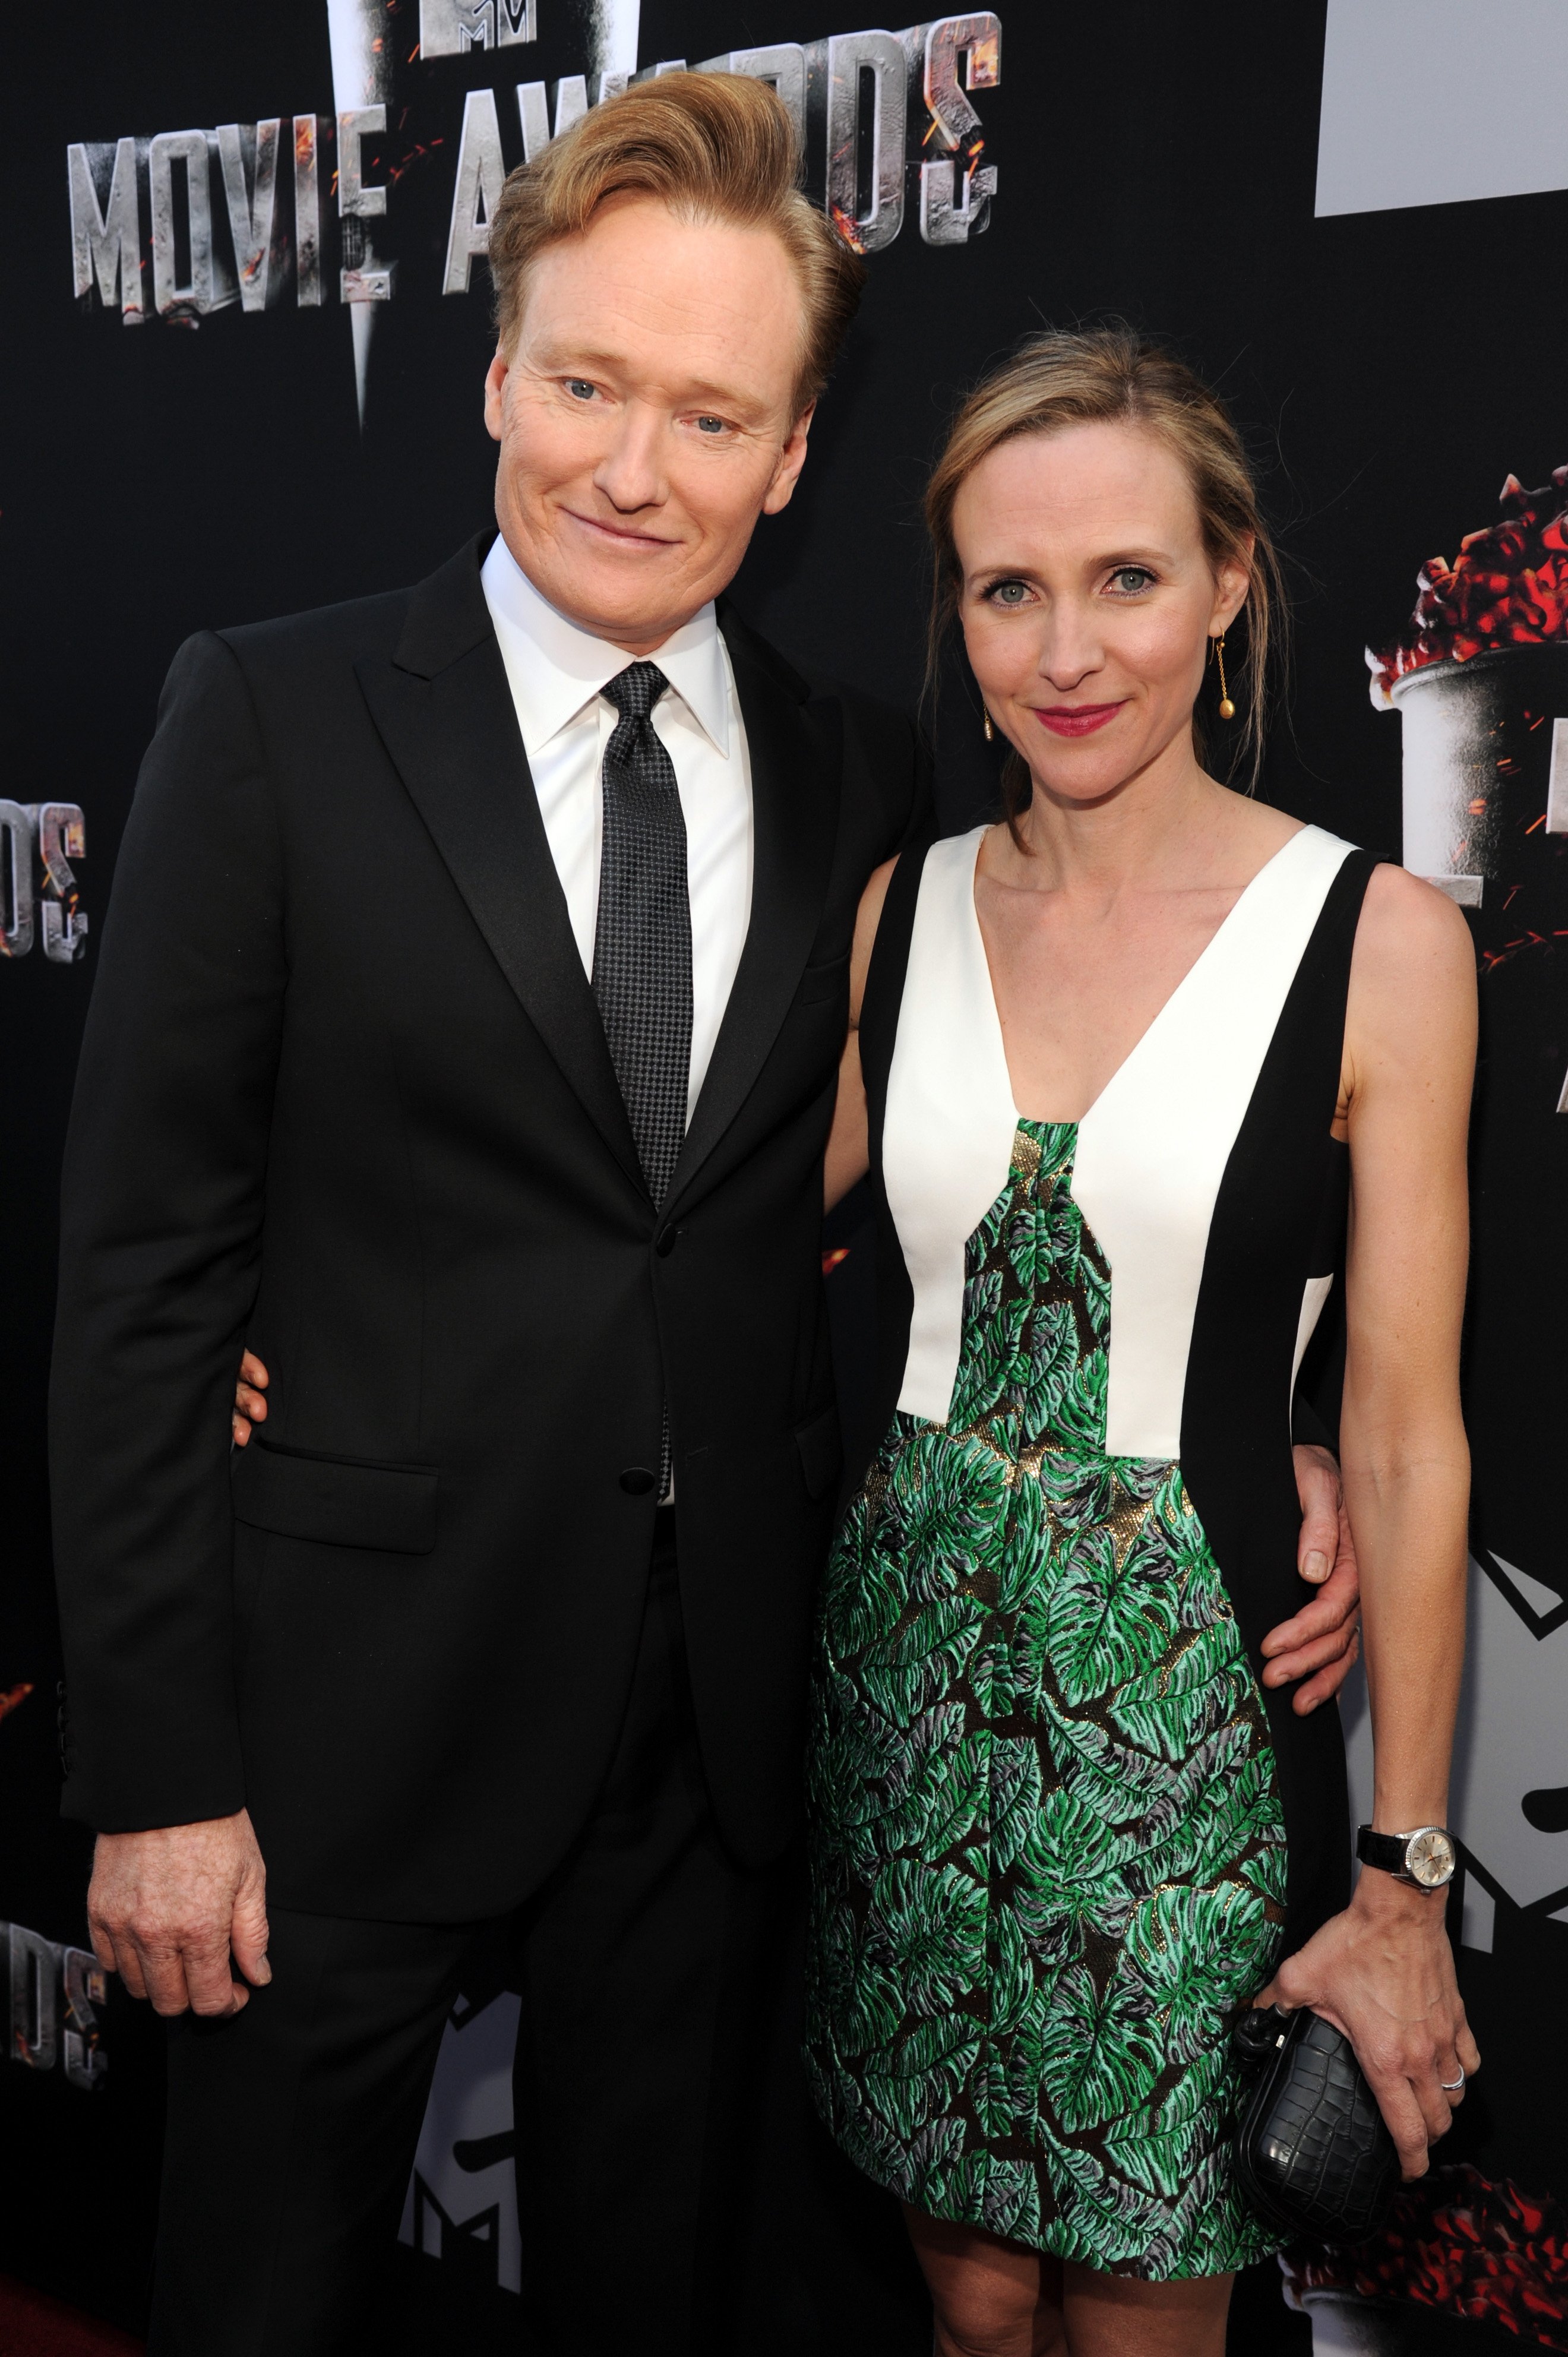 Conan O'Brien and Liza Powel O'Brien attend the 2014 MTV Movie Awards at Nokia Theatre L.A. Live on April 13, 2014, in Los Angeles, California. | Source: Getty Images